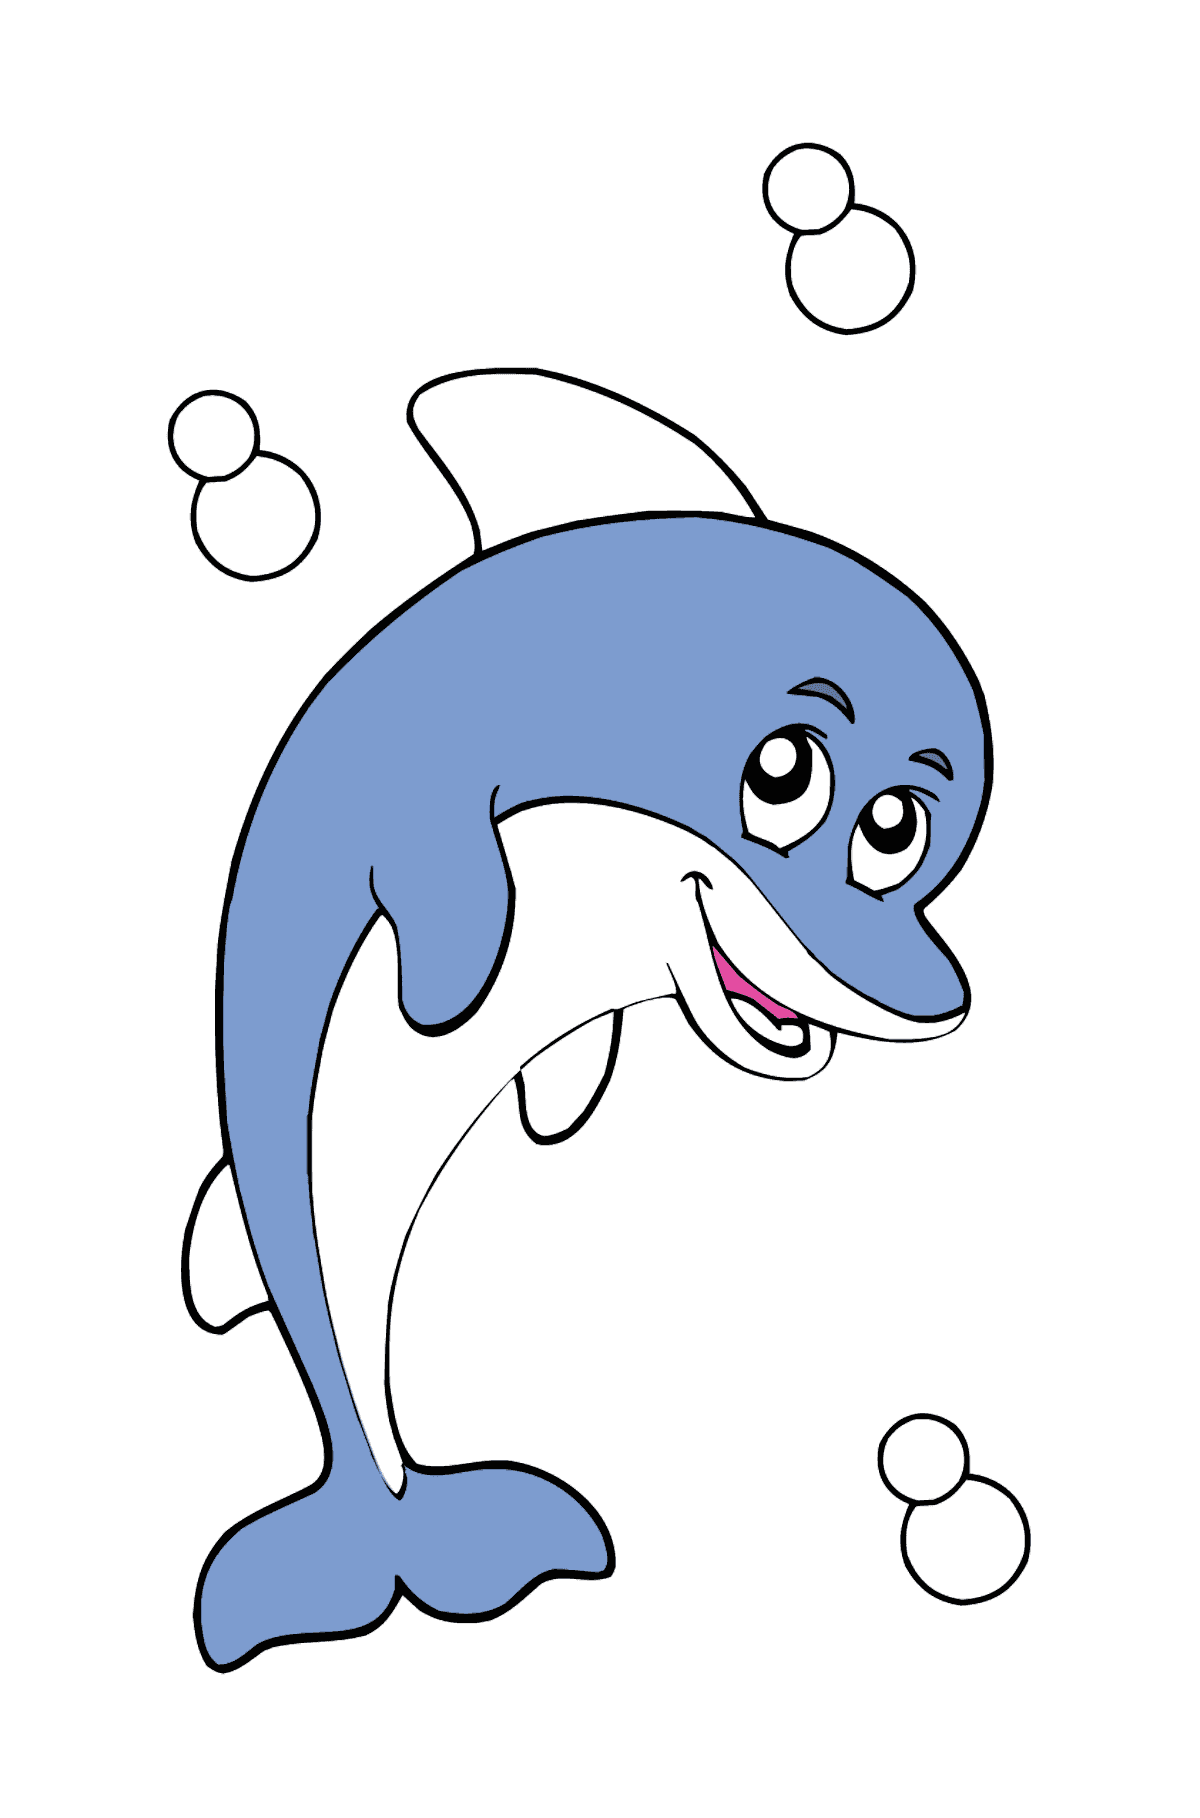 Coloring page with a Cartoon dolphin - Coloring Pages for Kids